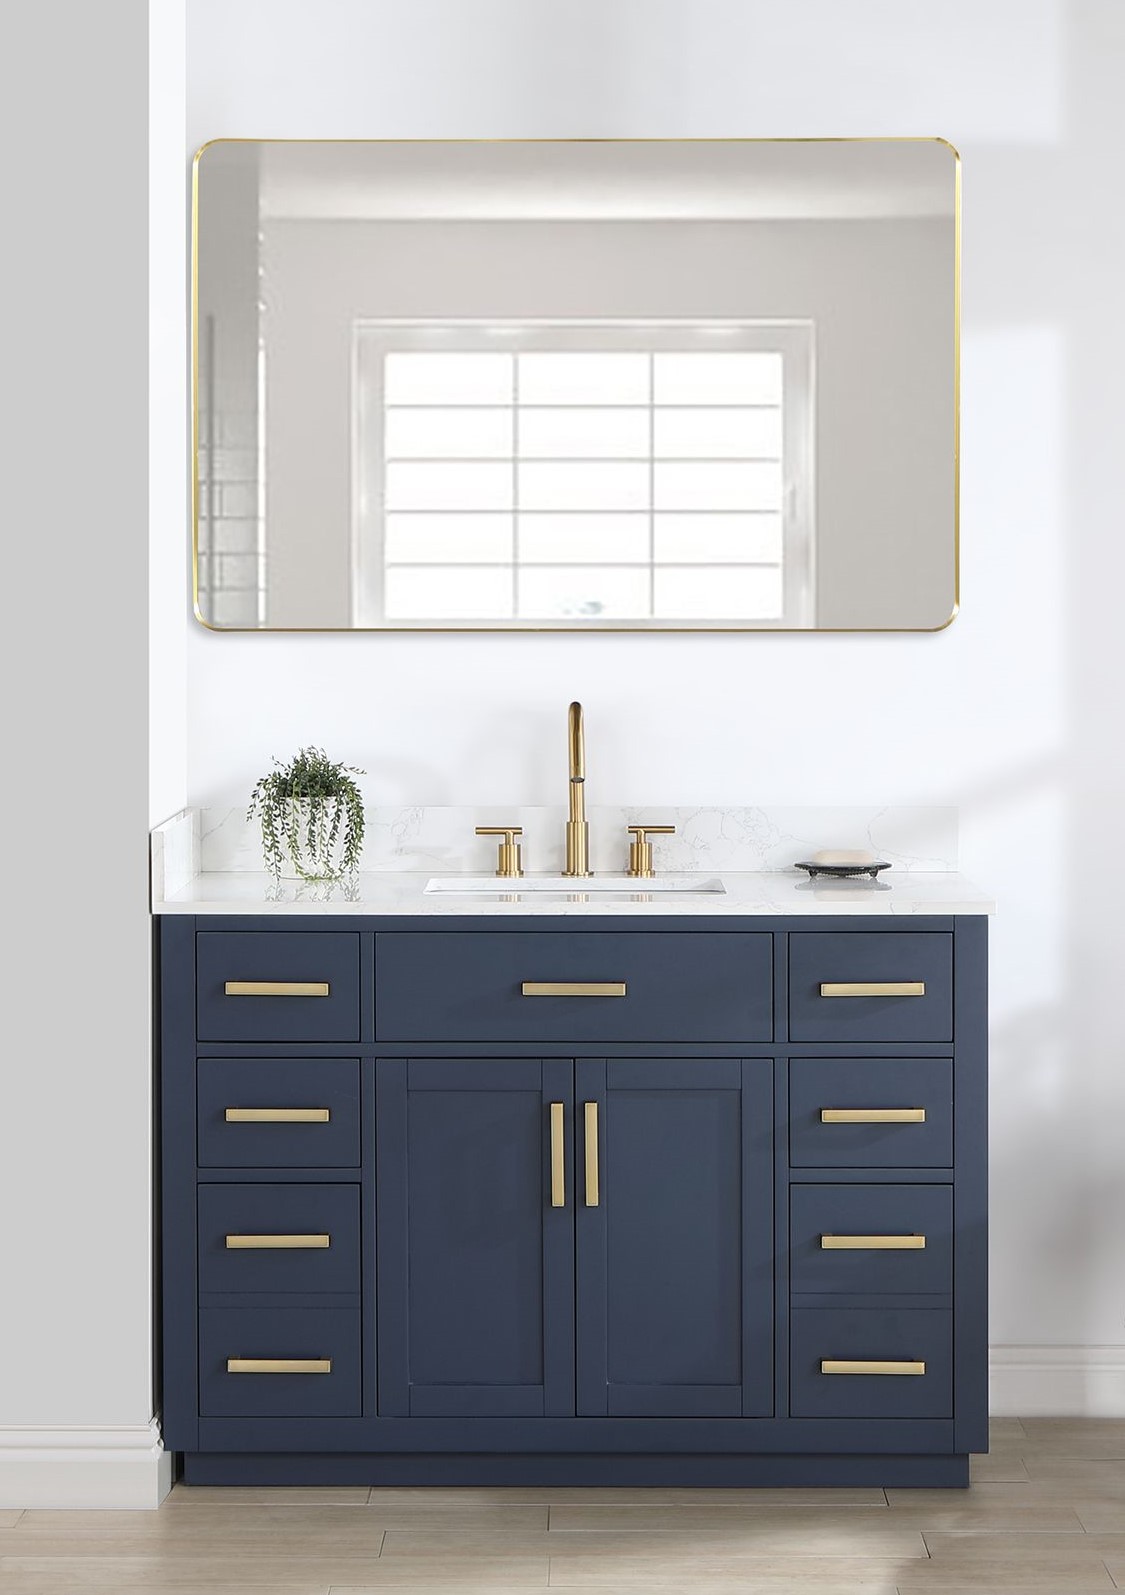 Issac Edwards 48" Single Bathroom Vanity in Royal Blue with Grain White Composite Stone Countertop with Mirror